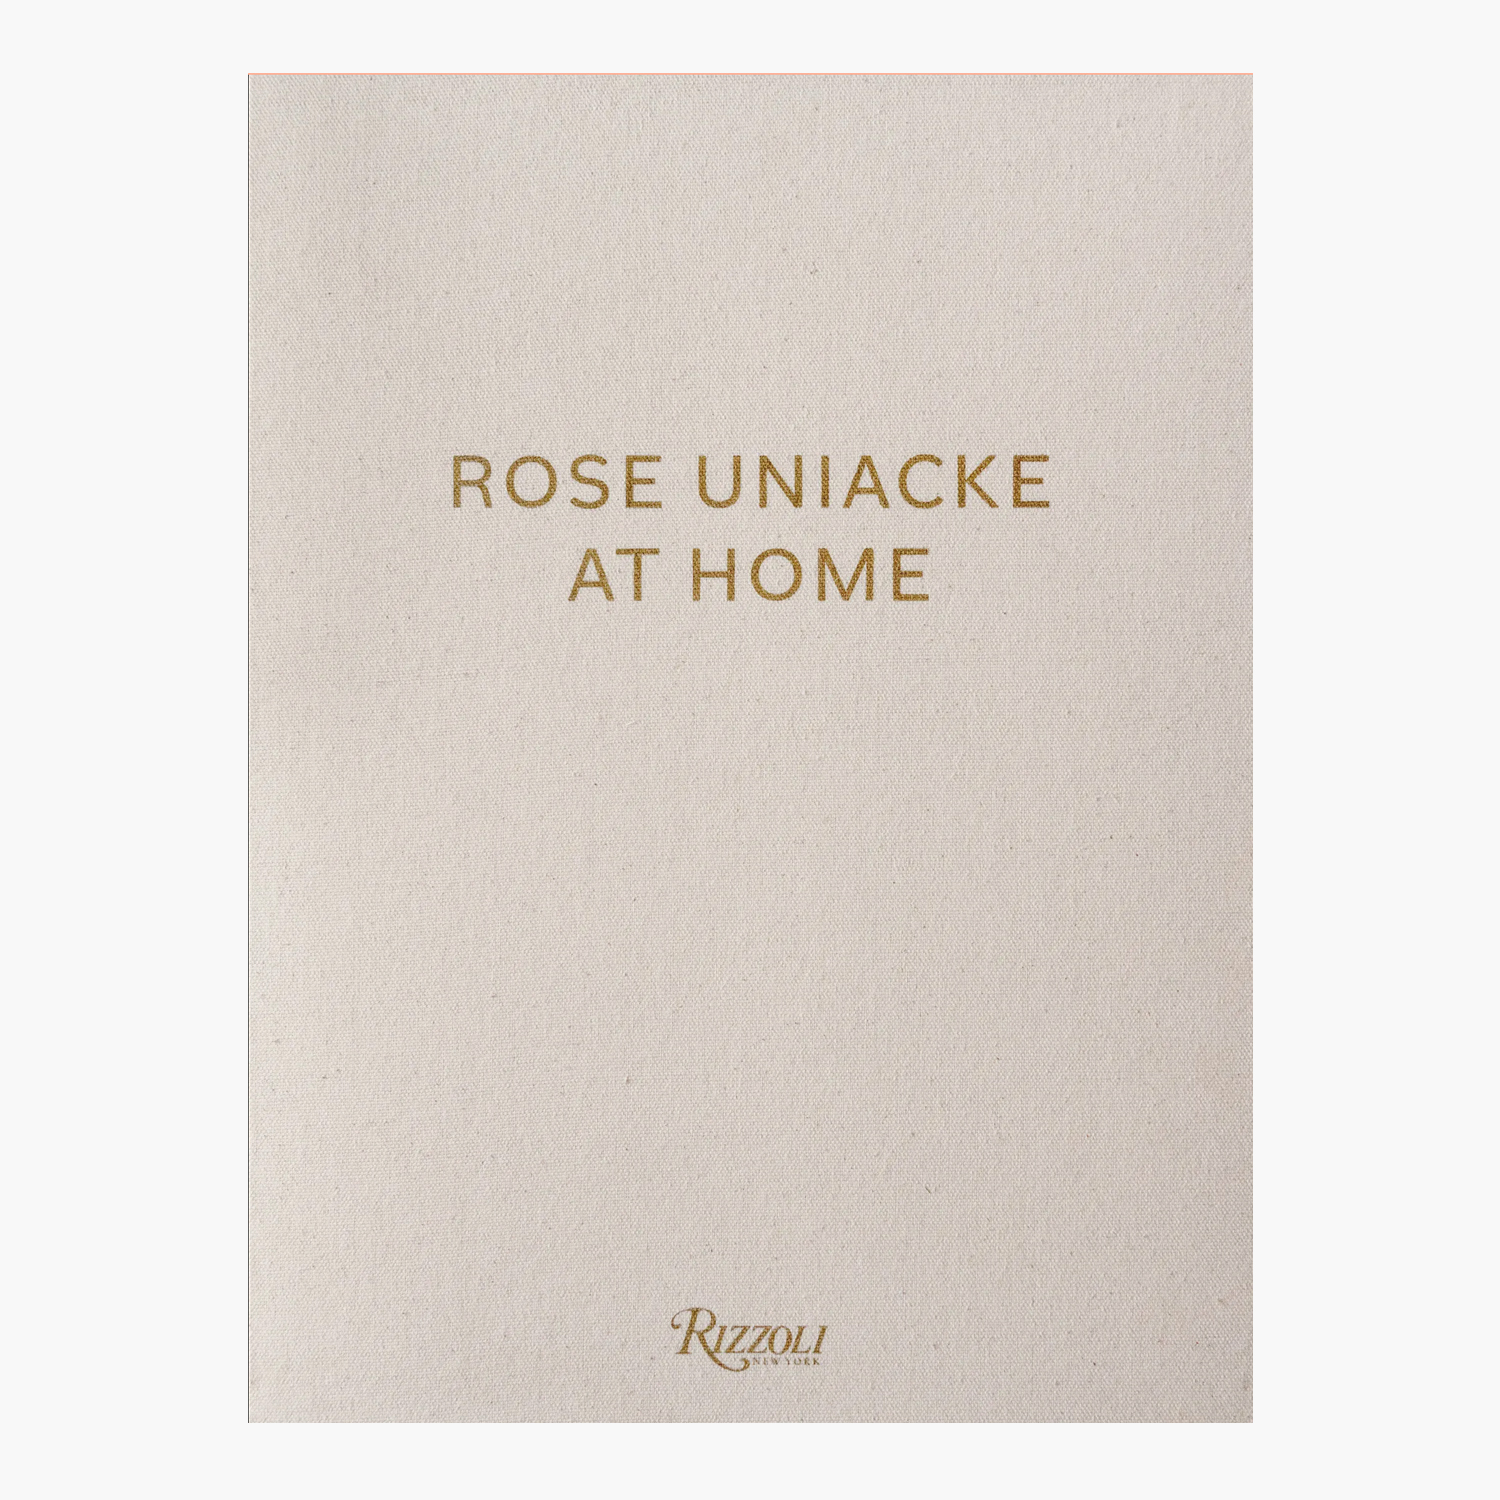 Rizzoli Rose Uniacke at Home (Limited Edition) 